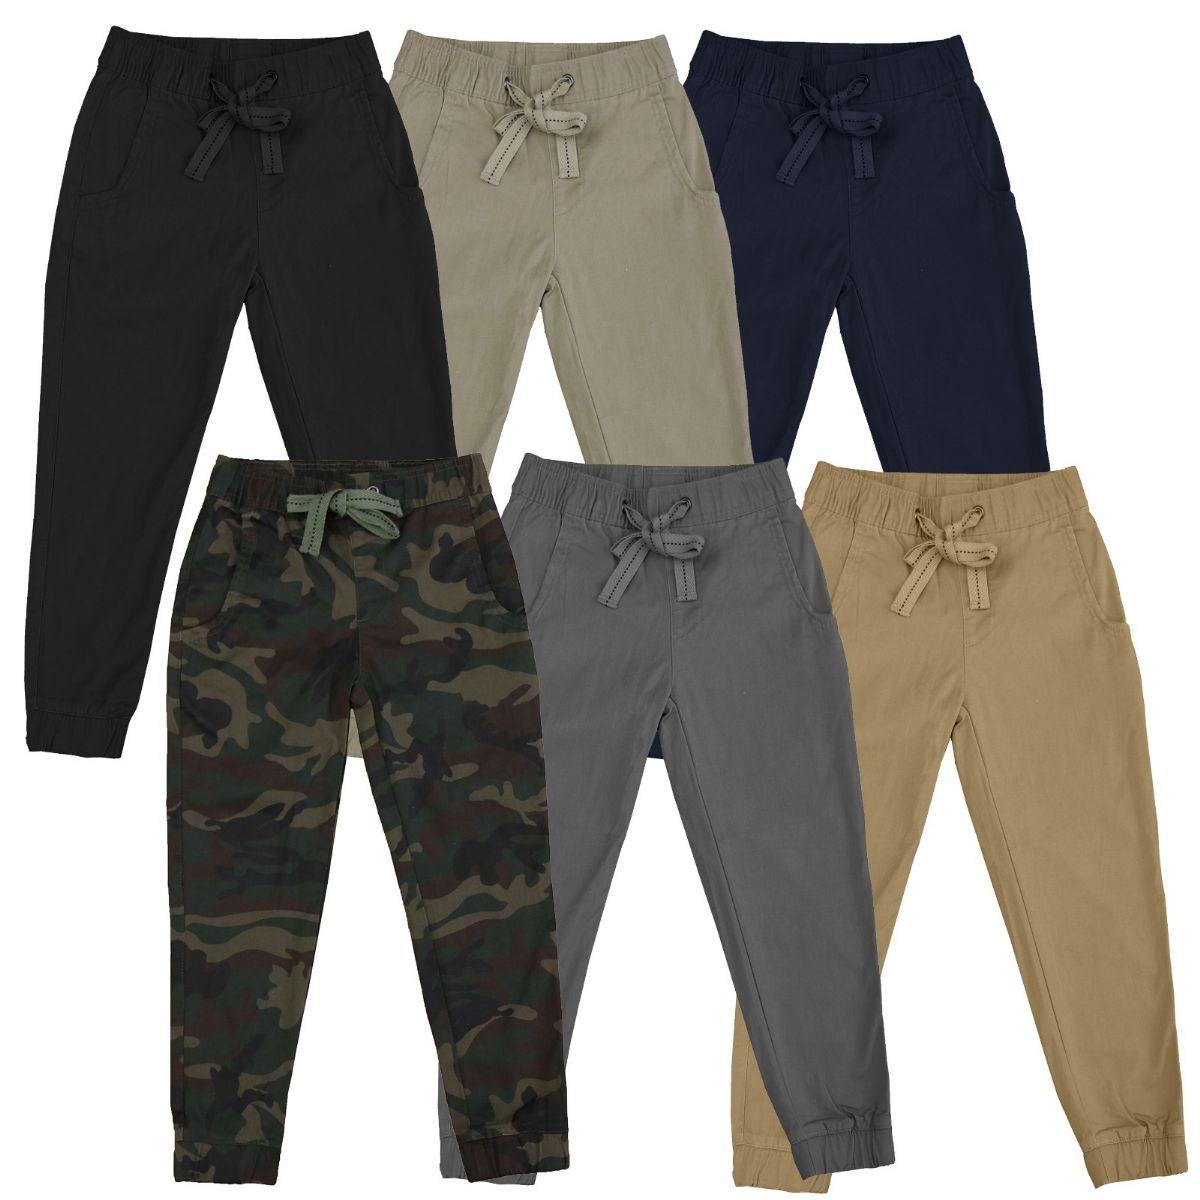 24 Pieces of Youth Boy Twill Jogger Pants In Assorted Colors Size L